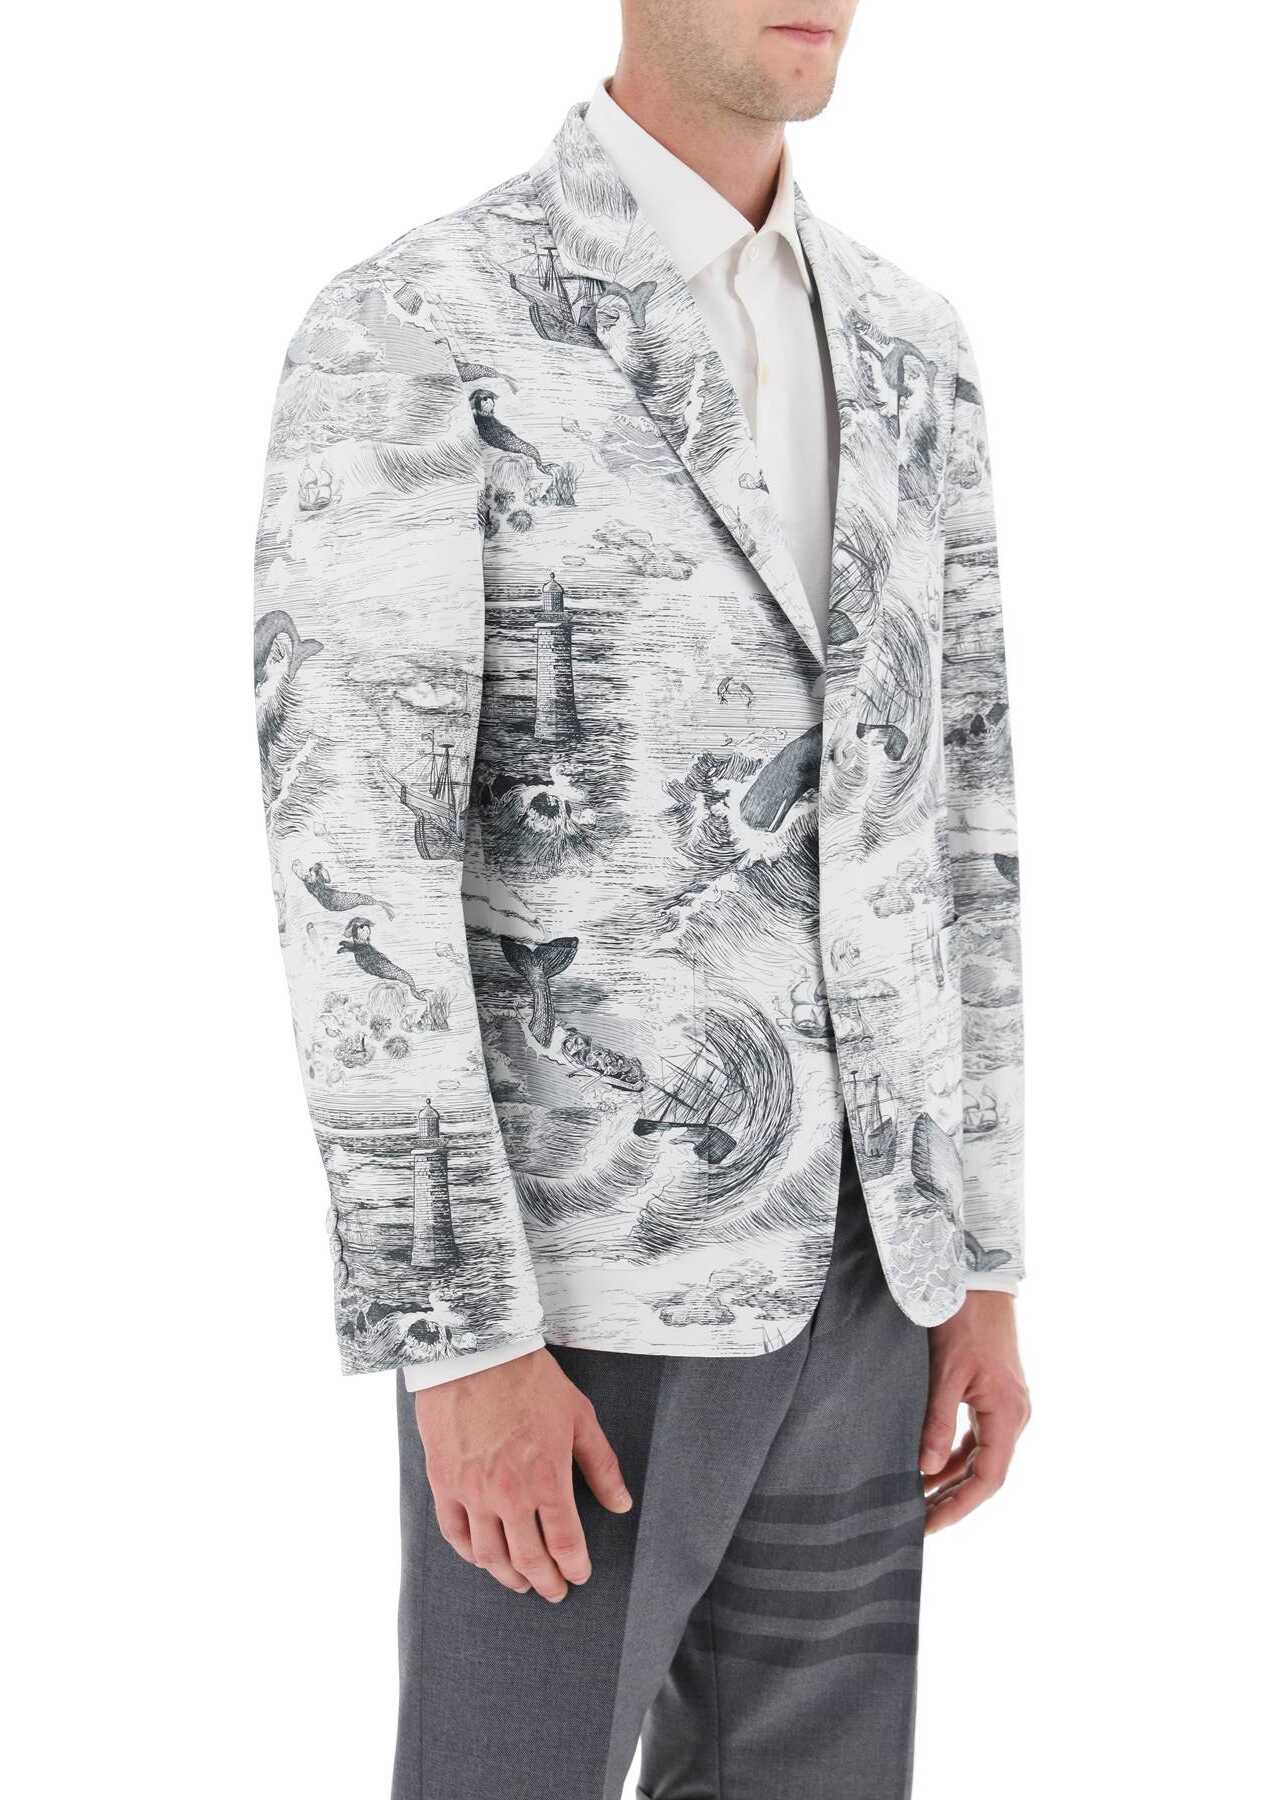 Thom Browne Deconstructed Single-Breasted Jacket With Nautical Toile Motif BLACK WHITE b-mall.ro